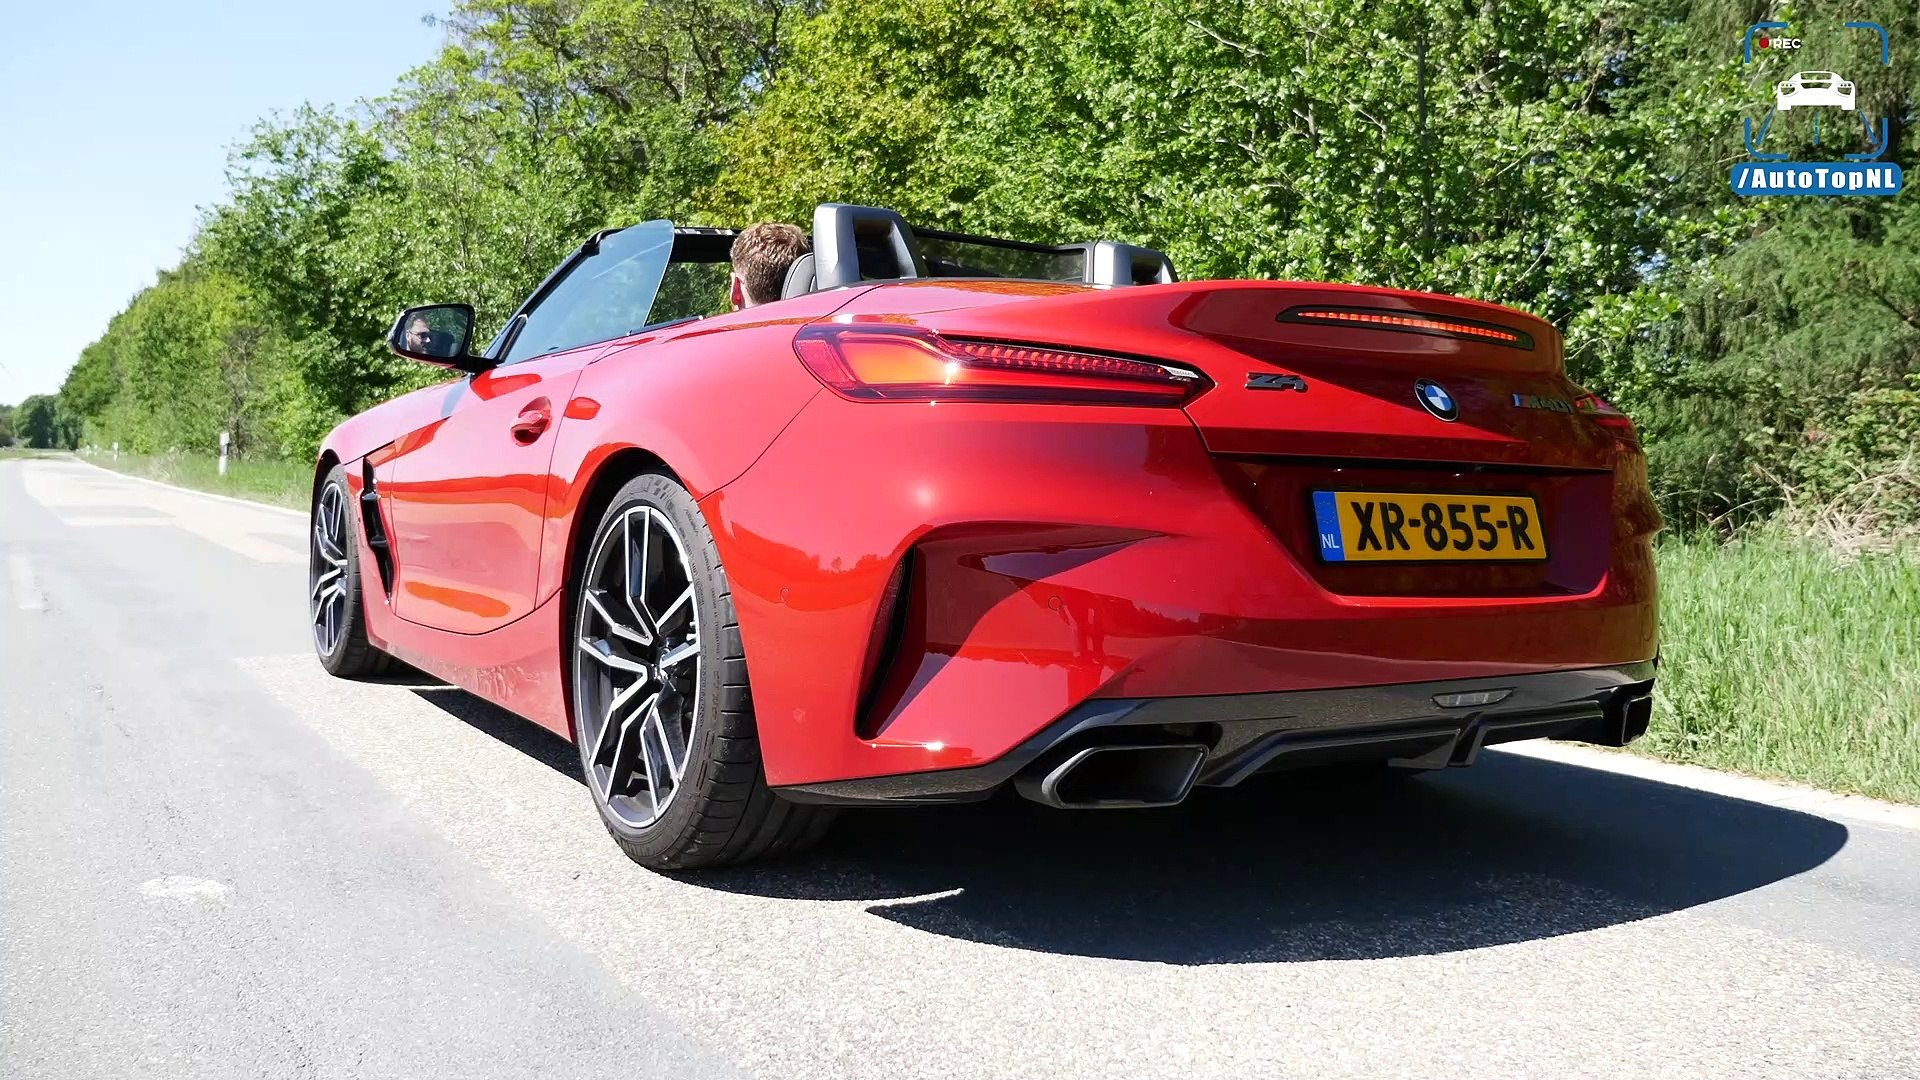 BMW Z4 M40i ACCELERATION & TOP SPEED 0-268KMH | 0-166MPH LAUNCH CONTROL by AutoTopNL